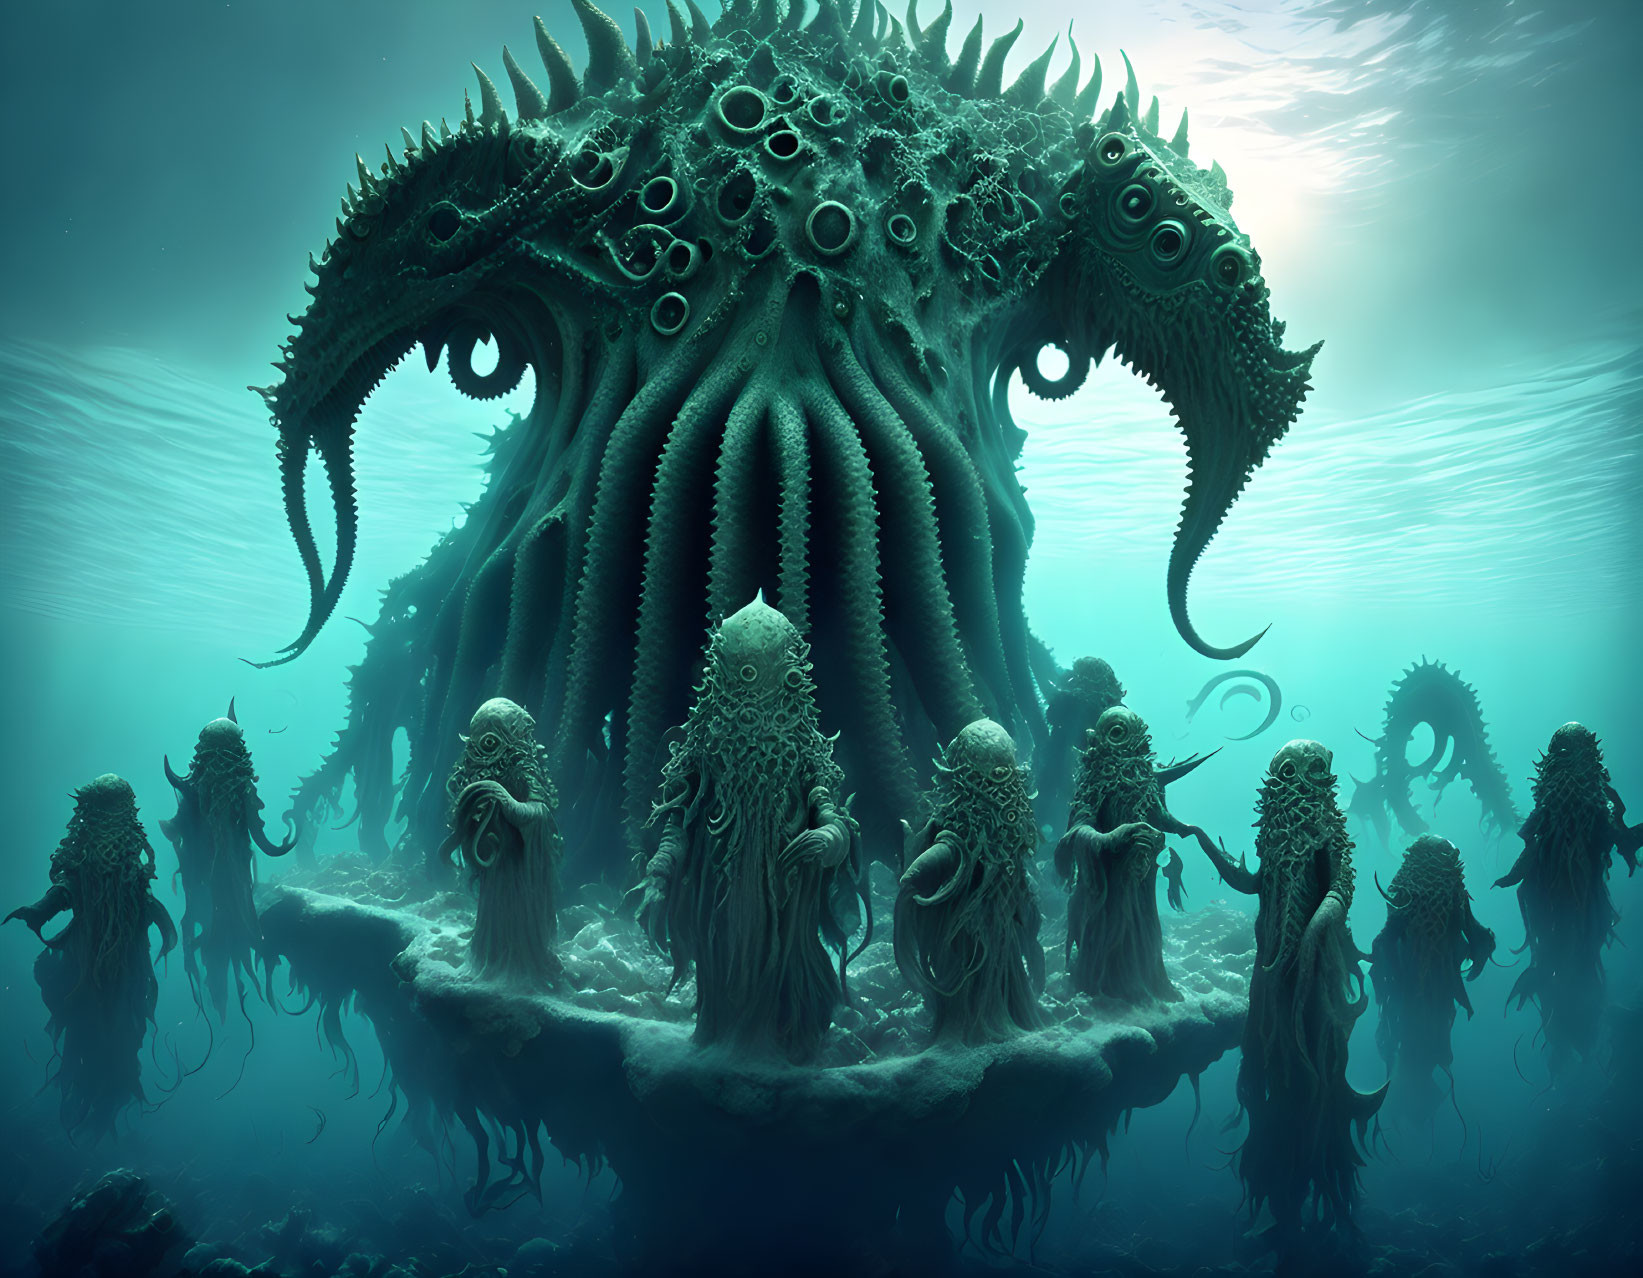 Colossal octopus-like creature with cloaked figures in murky green underwater scene